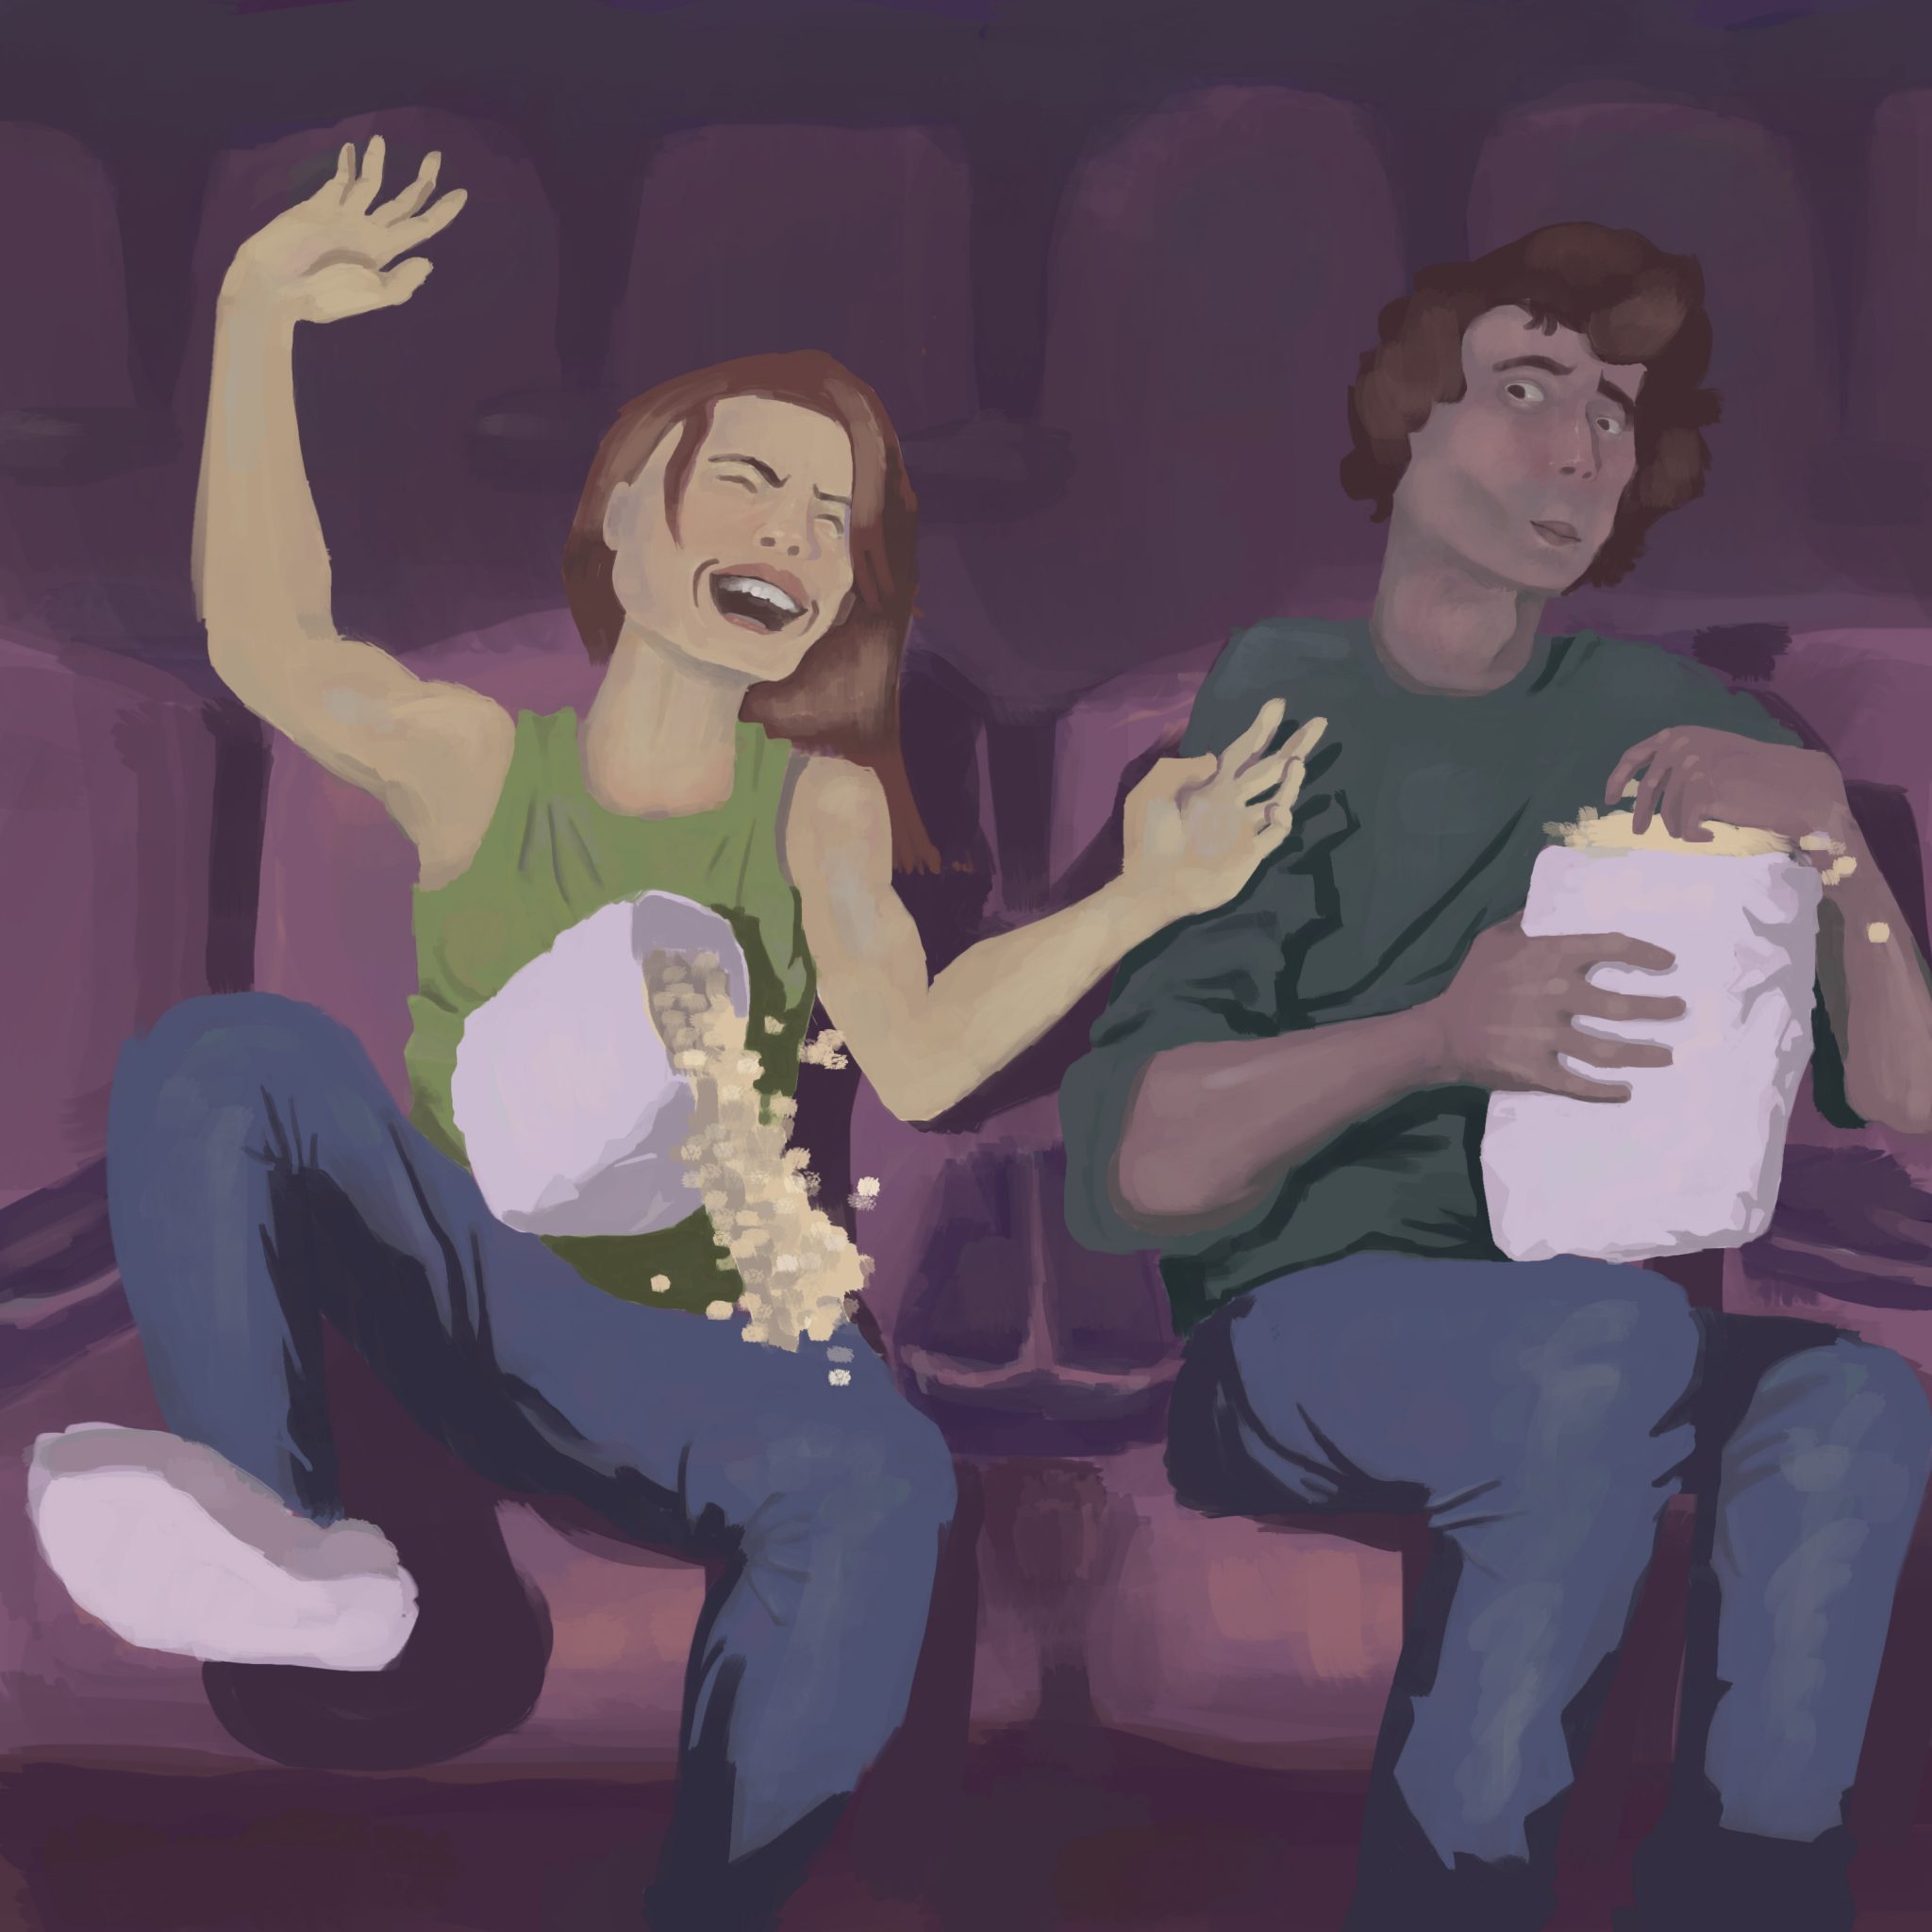 Graphic of two people in a theater; one of them is laughing hysterically, while the other looks at them in disbelief.